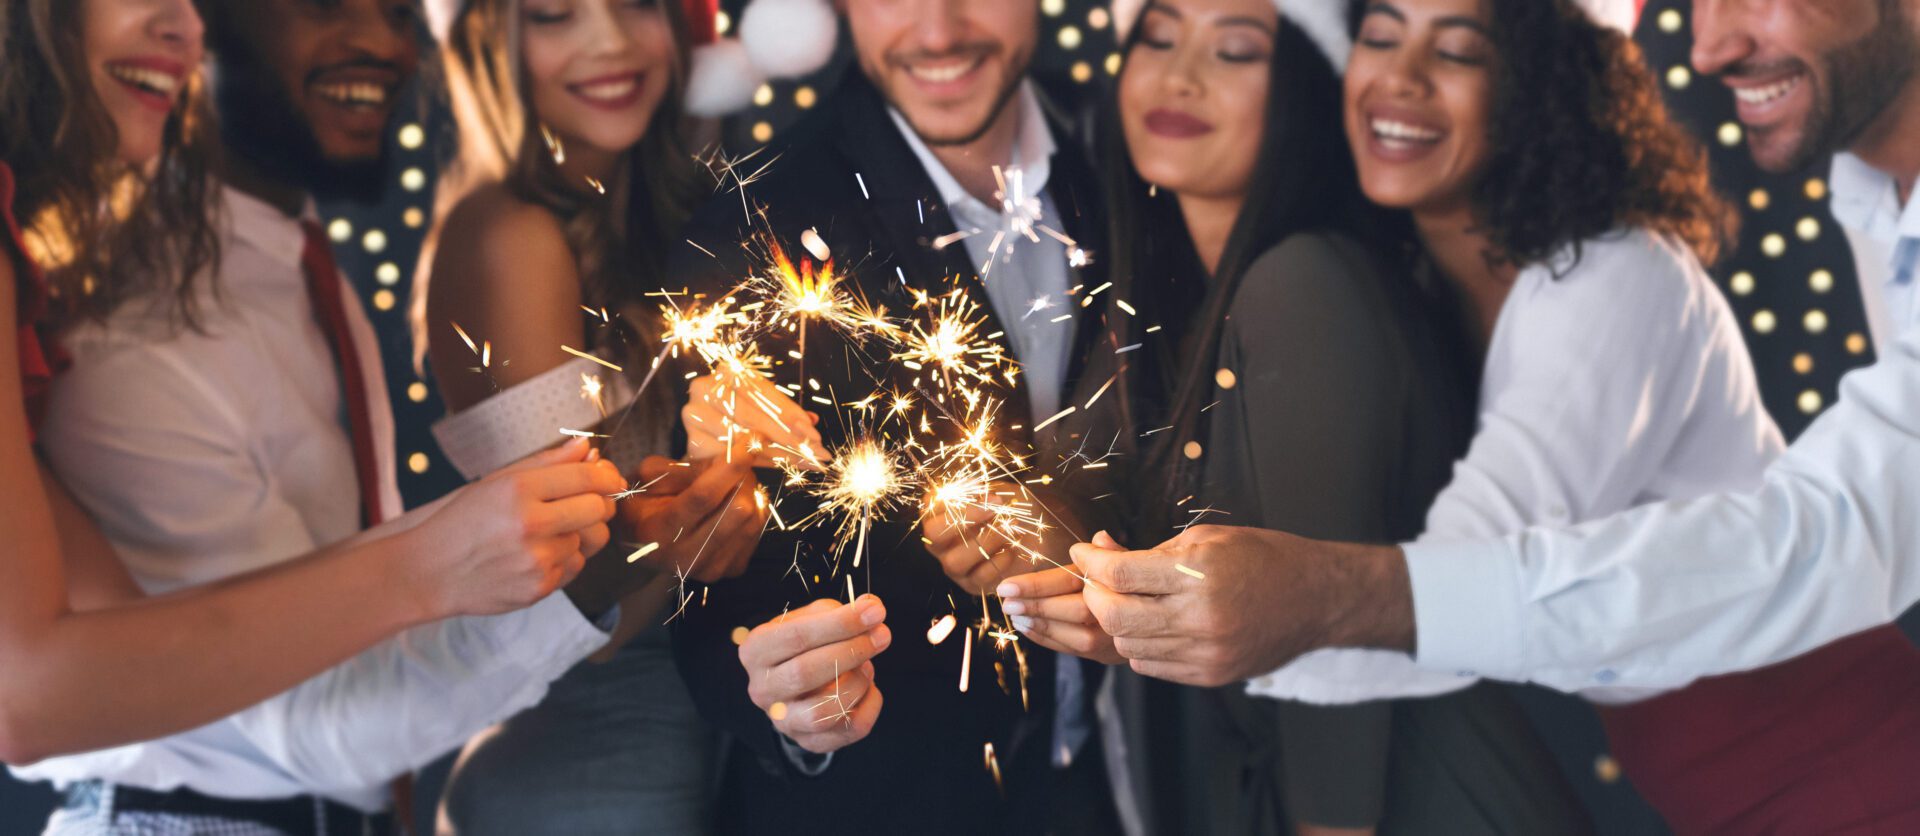 A group of people holding sparklers in their hands.